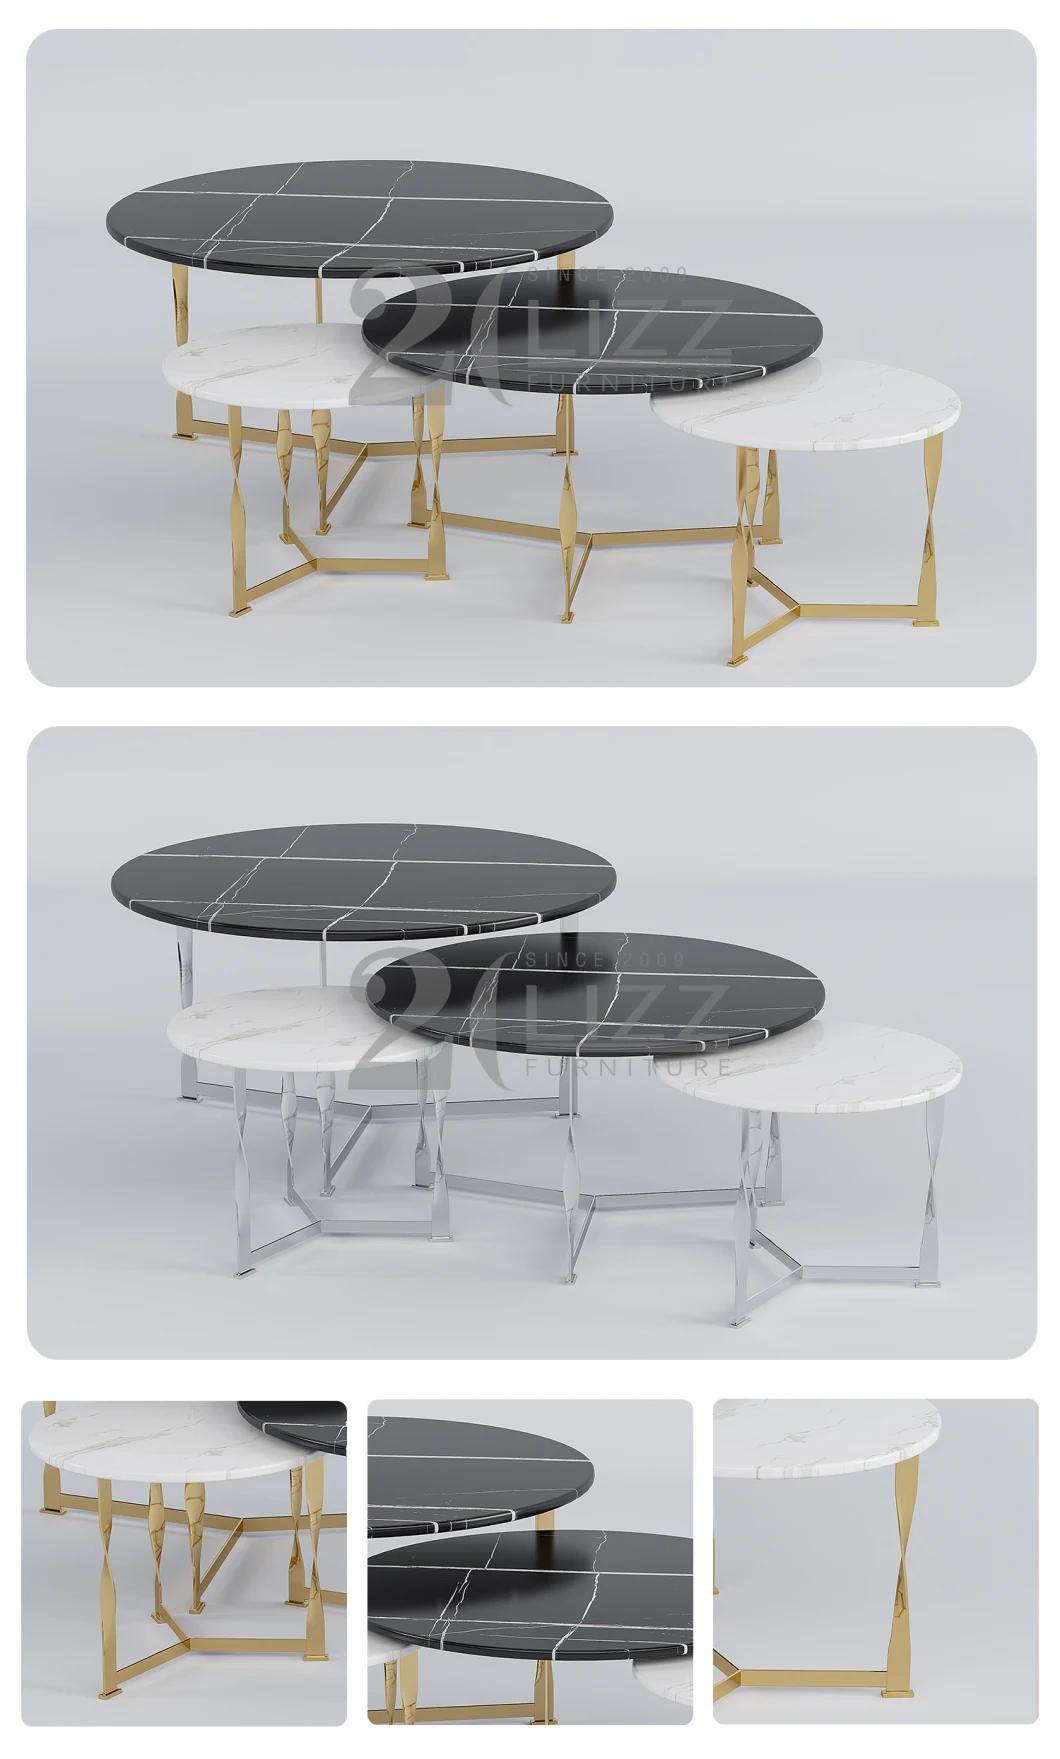 Nordic Modern Stylish Home Furniture Combination Table with Gold/Silver Stainless Steel Legs